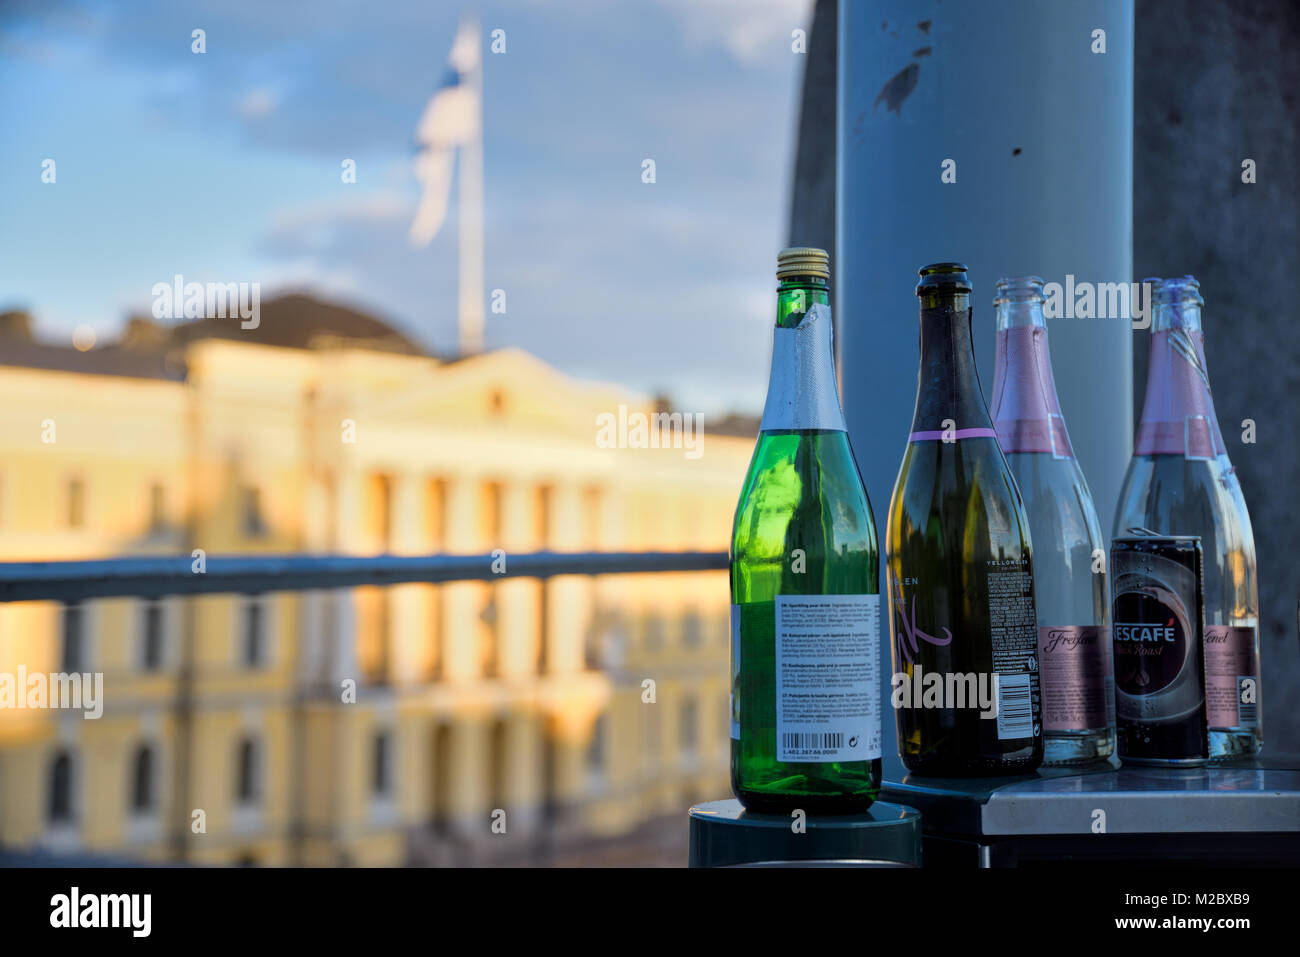 Helsinki, Finland - May 1, 2017: Sparkling wine bottles on top of a bin at the Senate Square with the Finnish Government palace on the background. Stock Photo